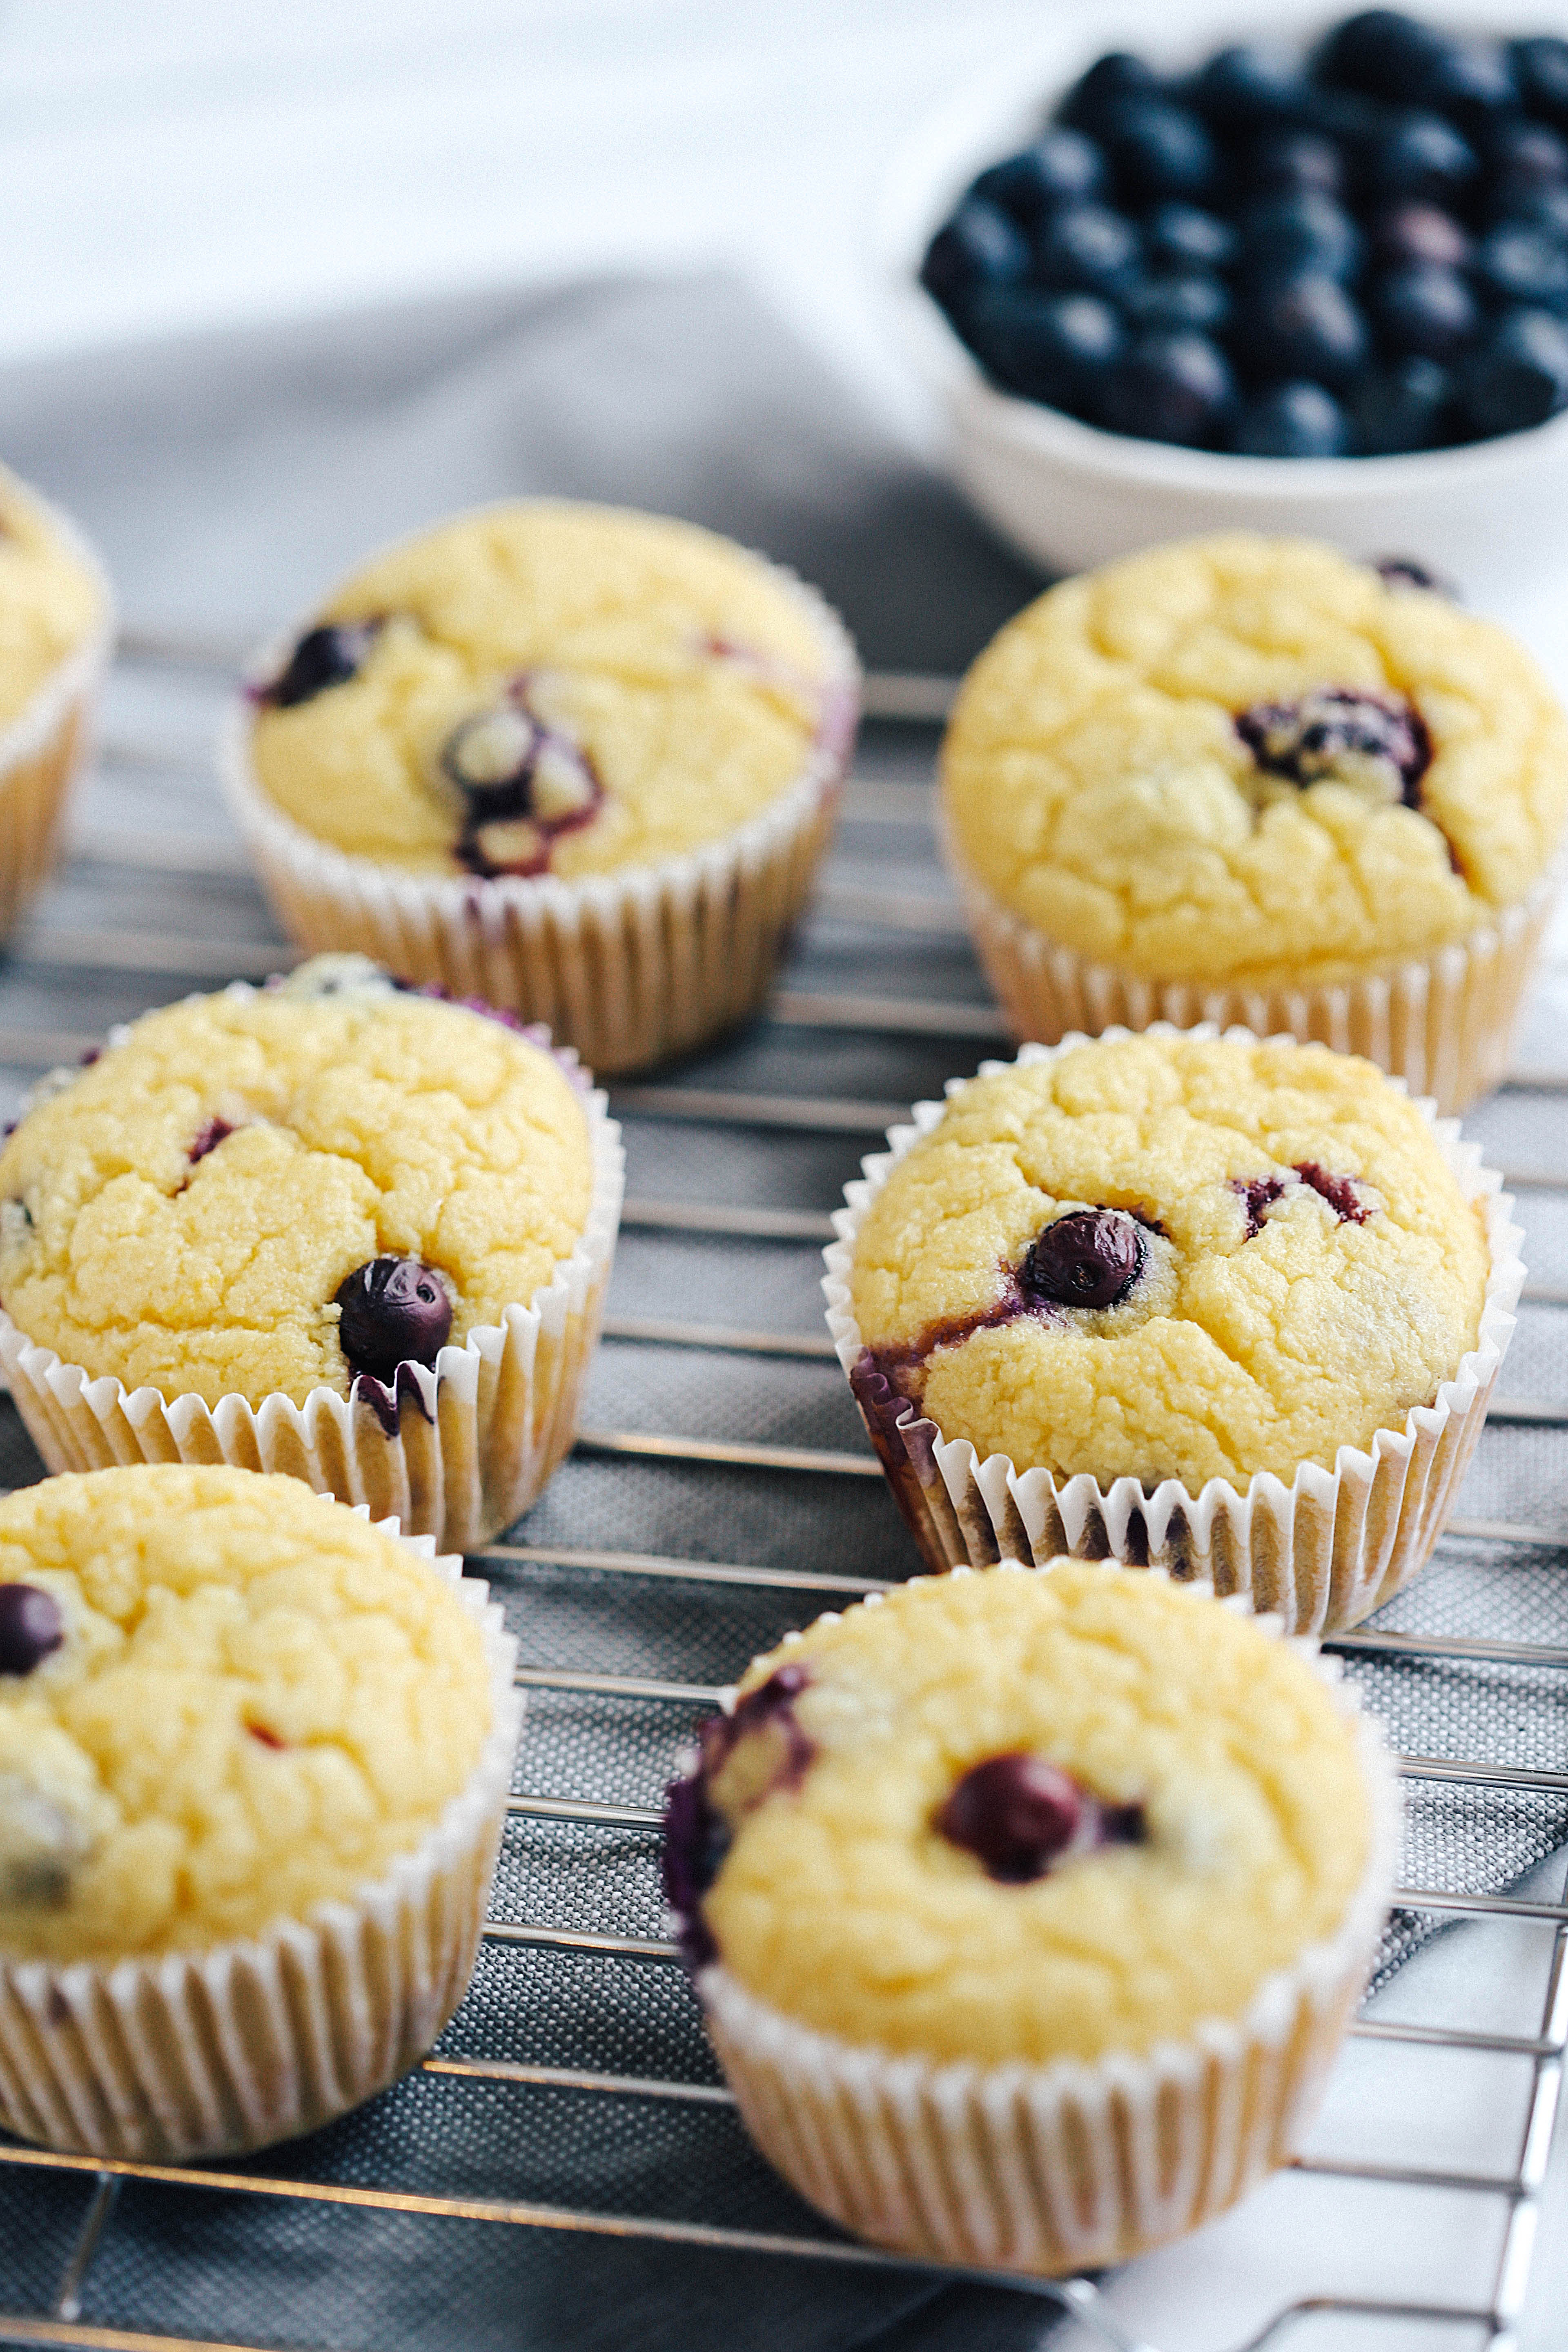 Healthy Lemon Blueberry Muffins that are moist, super fluffy and can easily be made in just minutes using your blender which makes clean up a breeze!